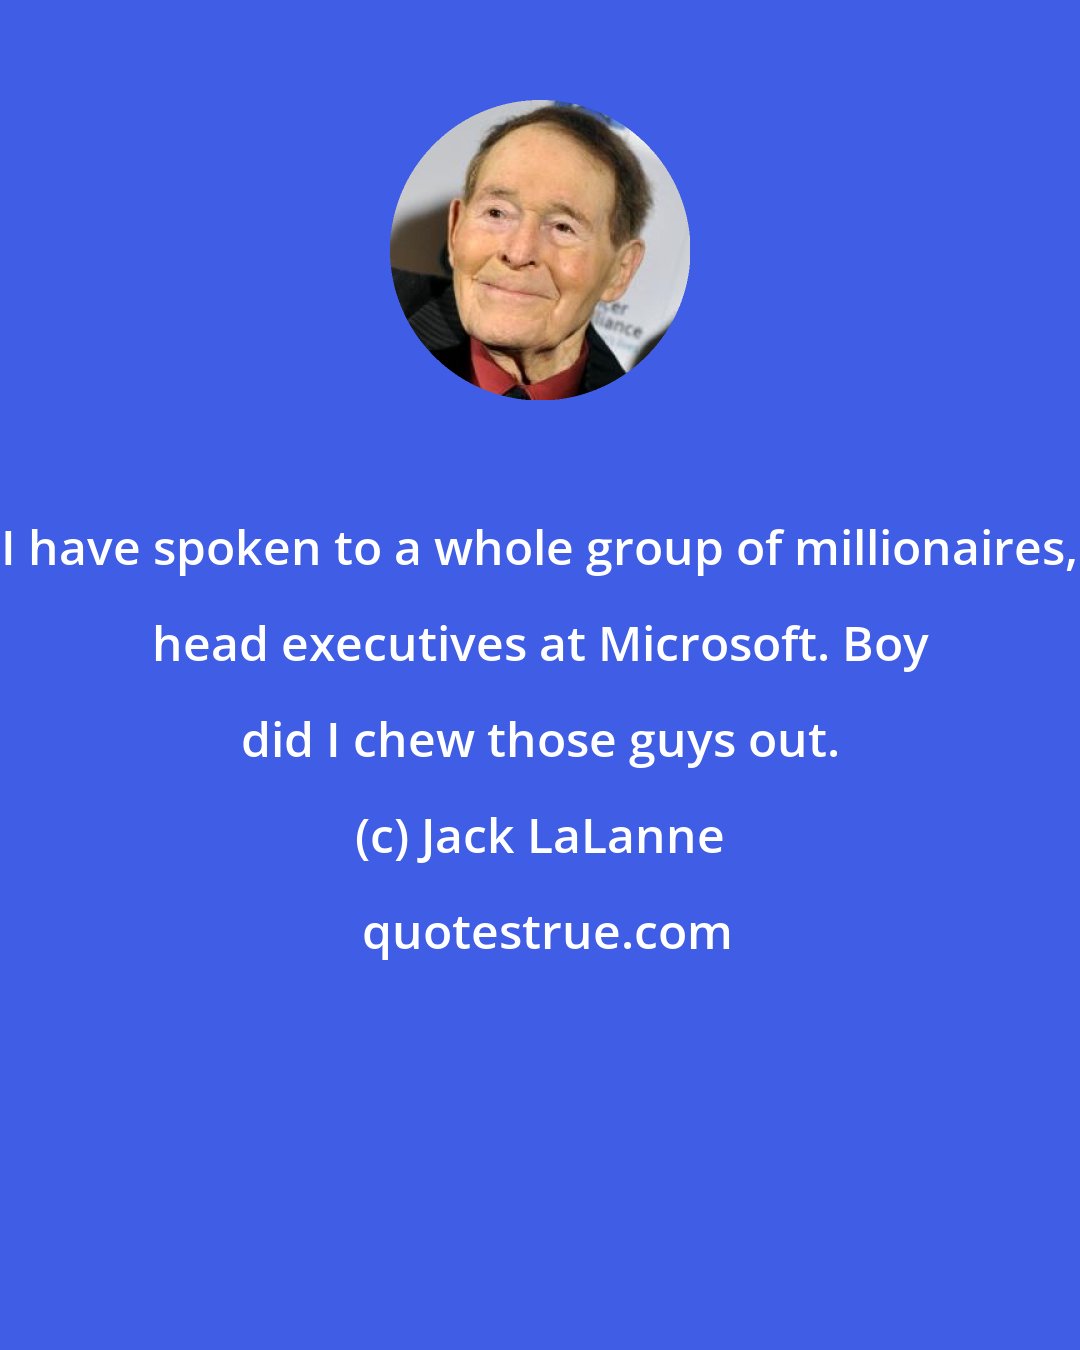 Jack LaLanne: I have spoken to a whole group of millionaires, head executives at Microsoft. Boy did I chew those guys out.